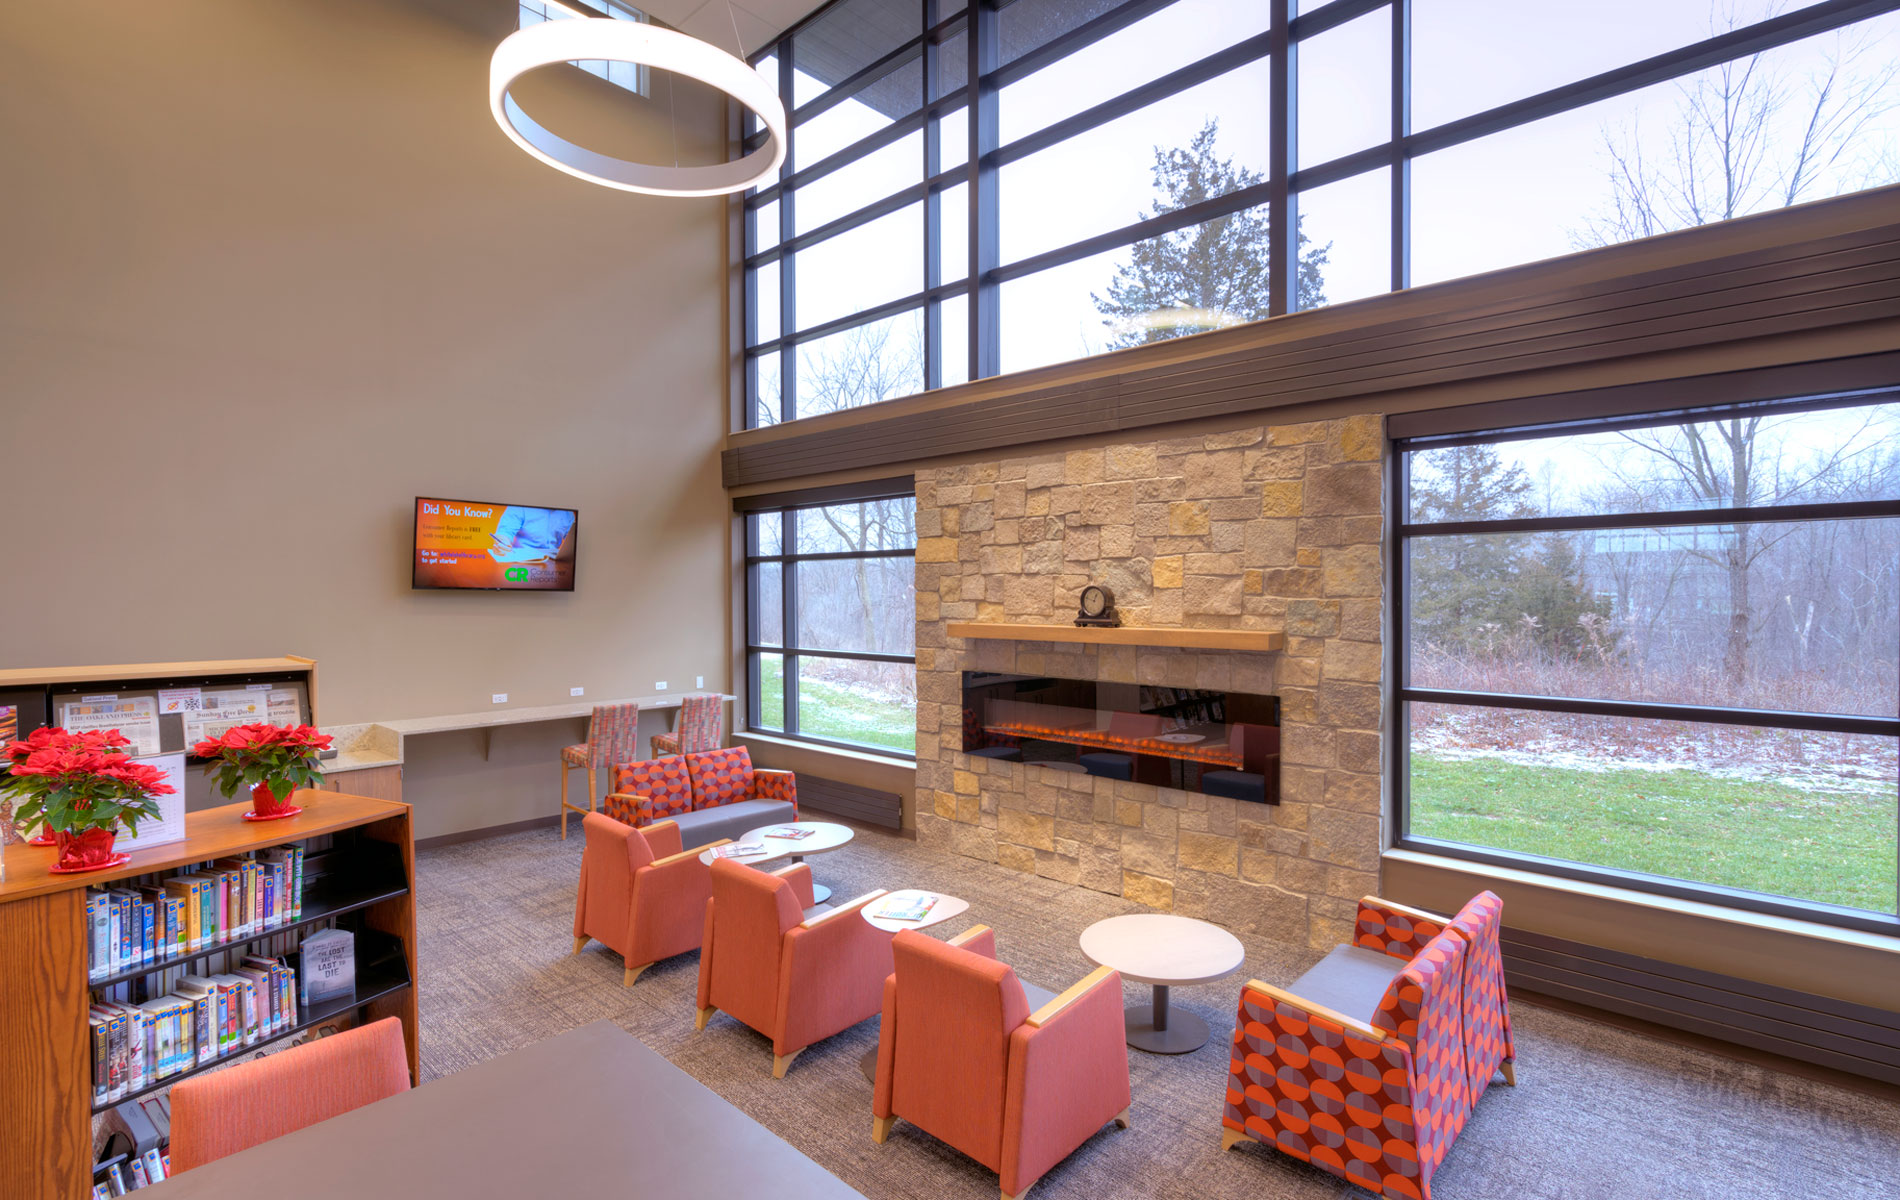 Image of the interior of white lake library showing the Mix seating area and fireplace